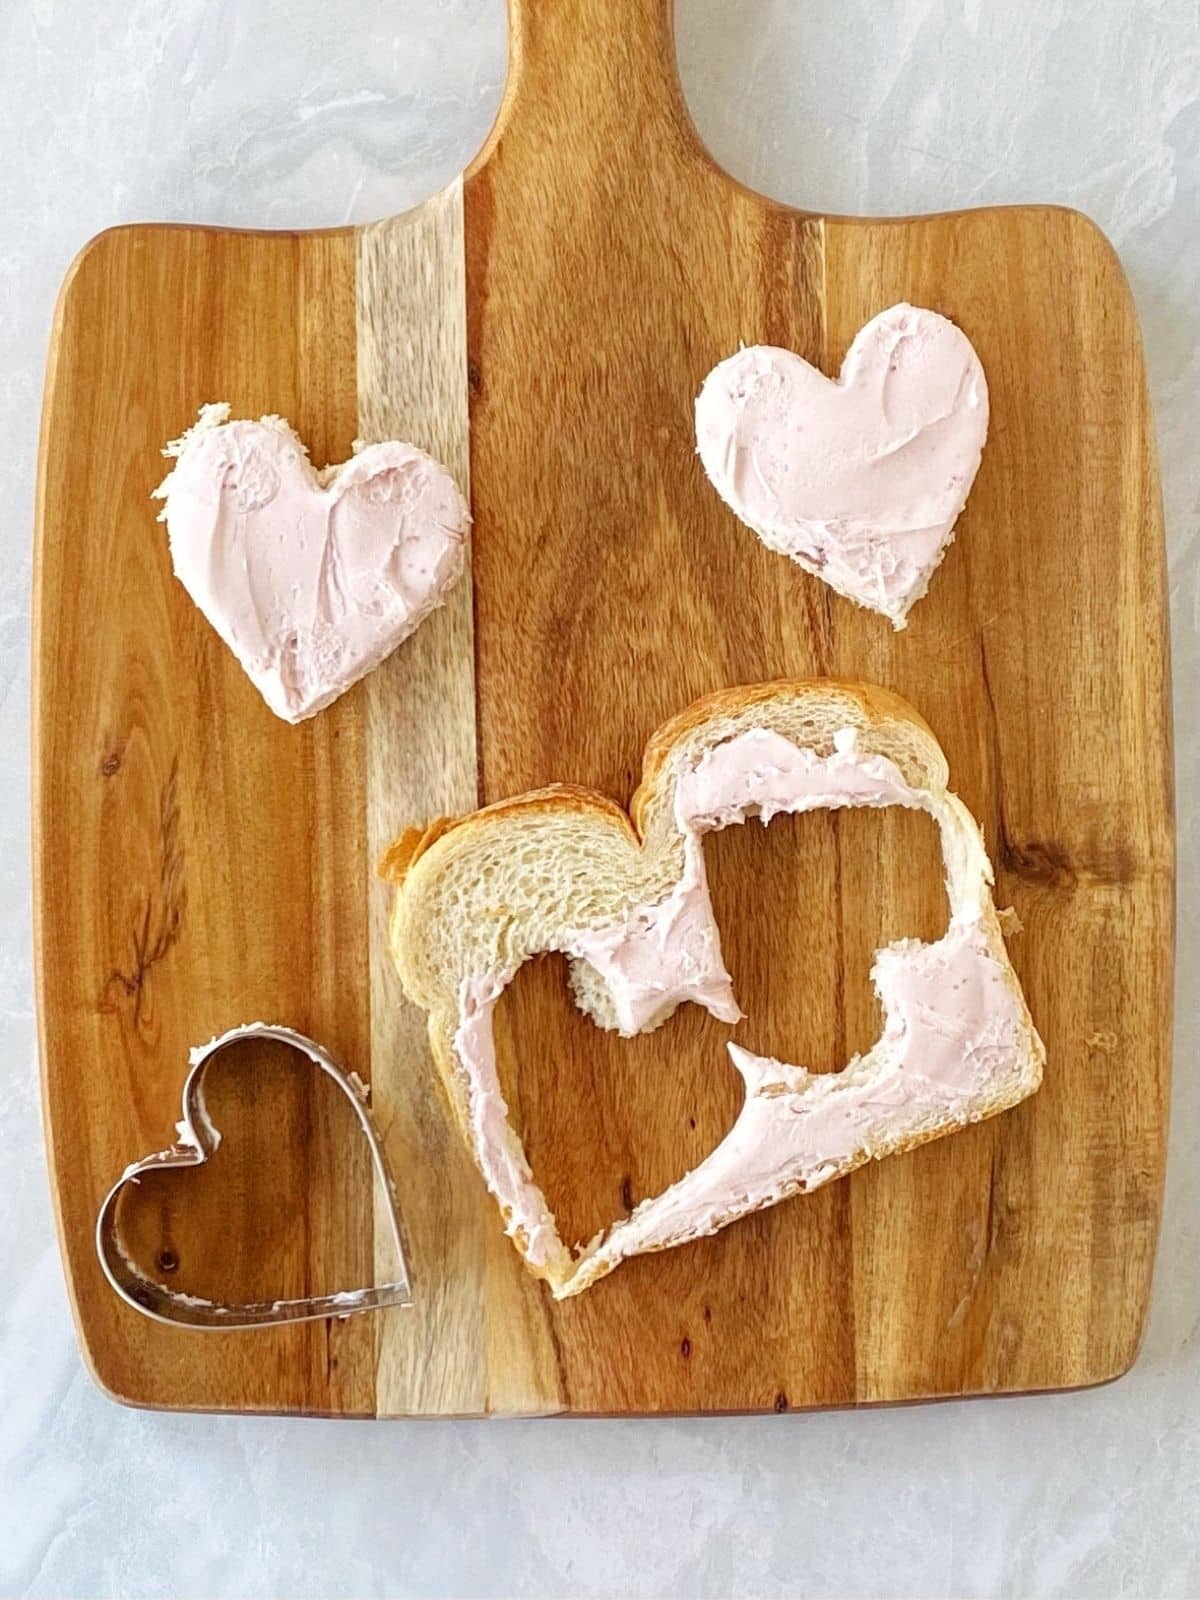 cutting heart shapes out of bread.